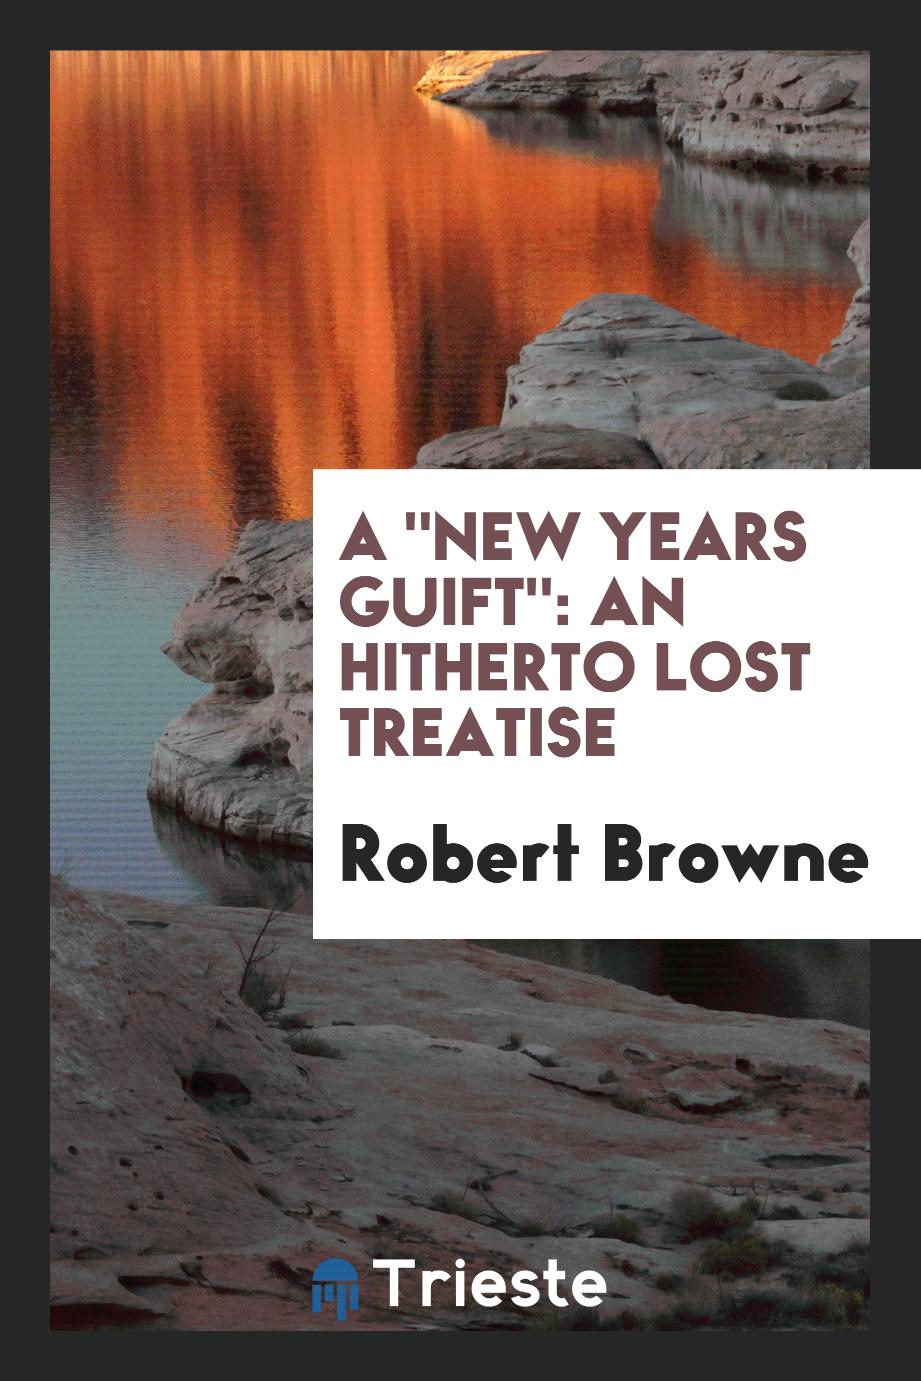 A "New Years Guift": An Hitherto Lost Treatise